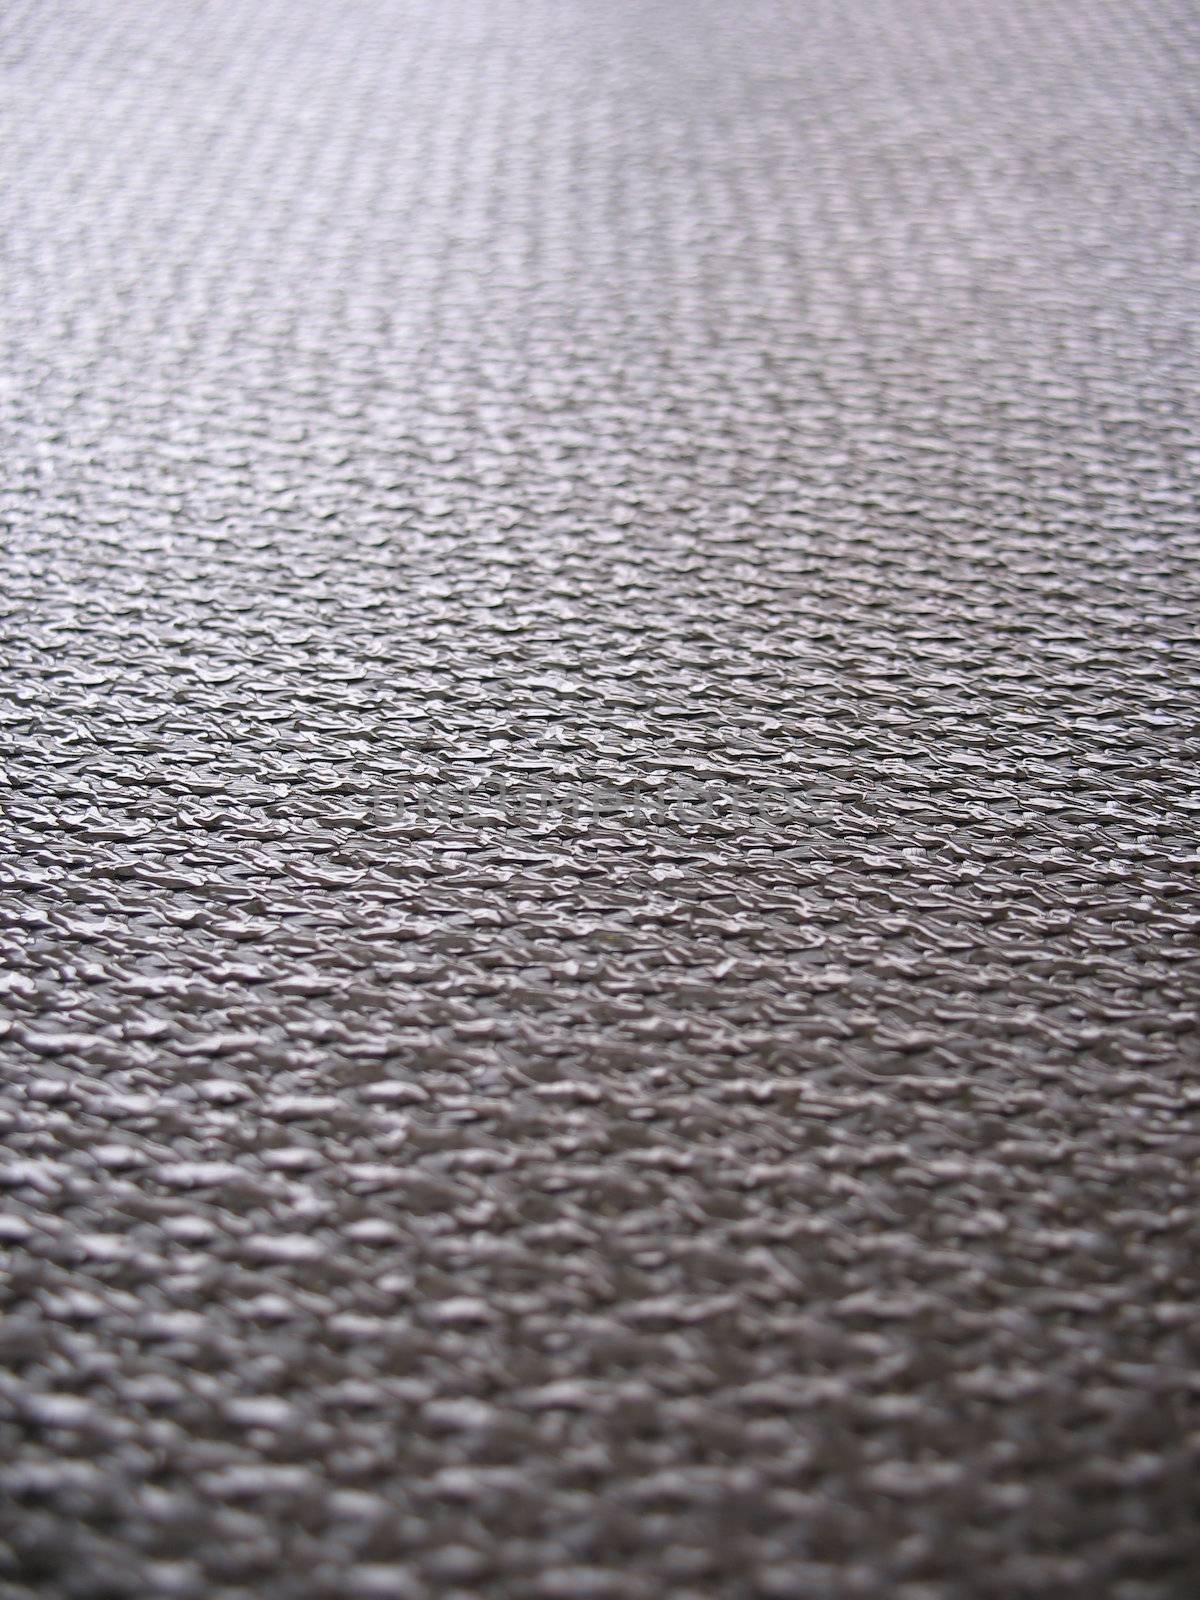 Real carbon fiber in its raw form - this is the material that is used to make durable, strong parts.  Shallow depth of field.